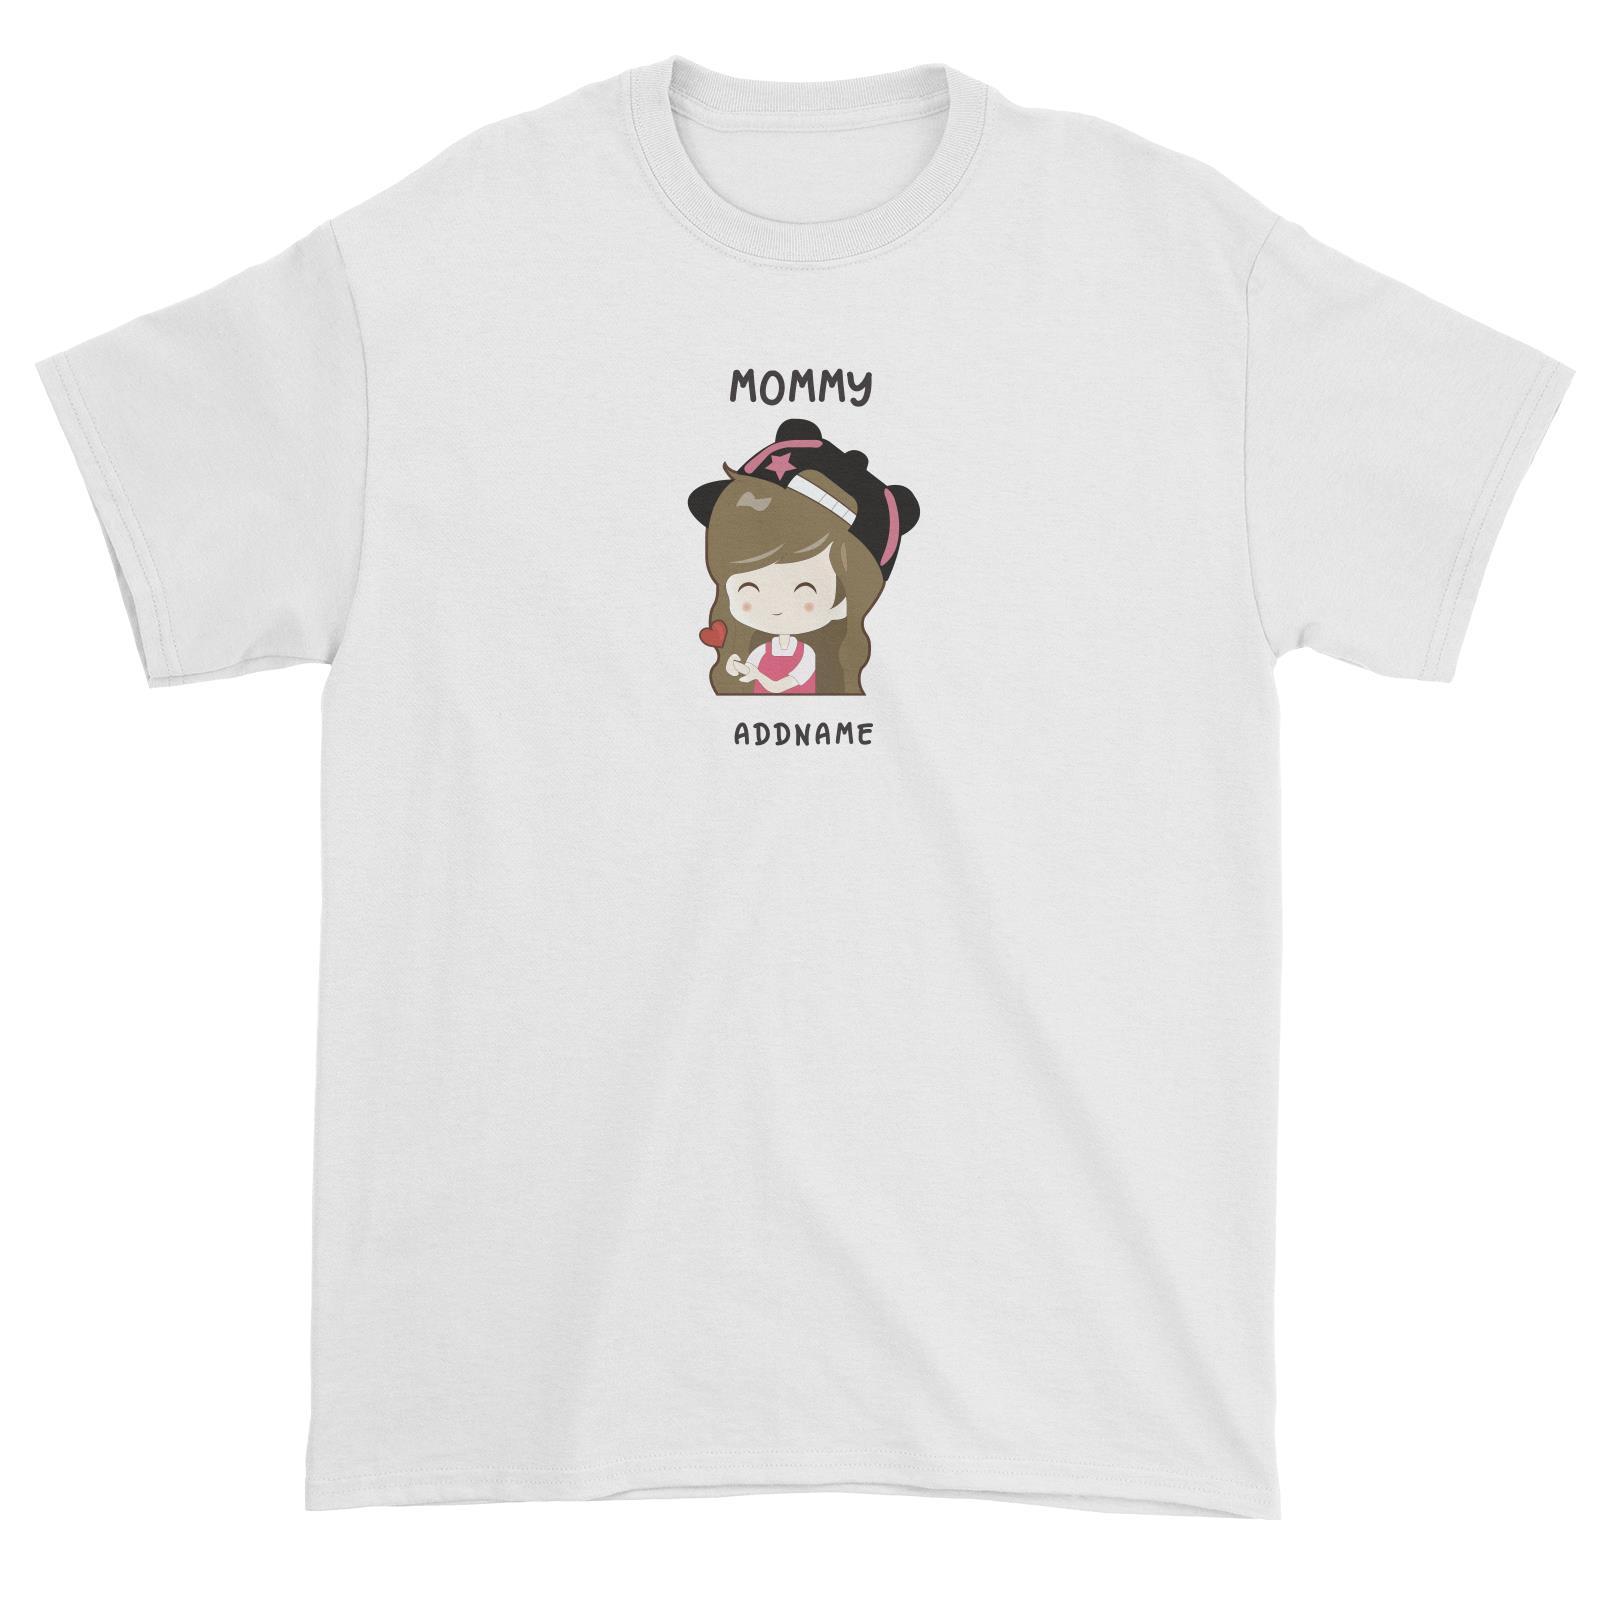 My Lovely Family Series Mommy Addname Unisex T-Shirt